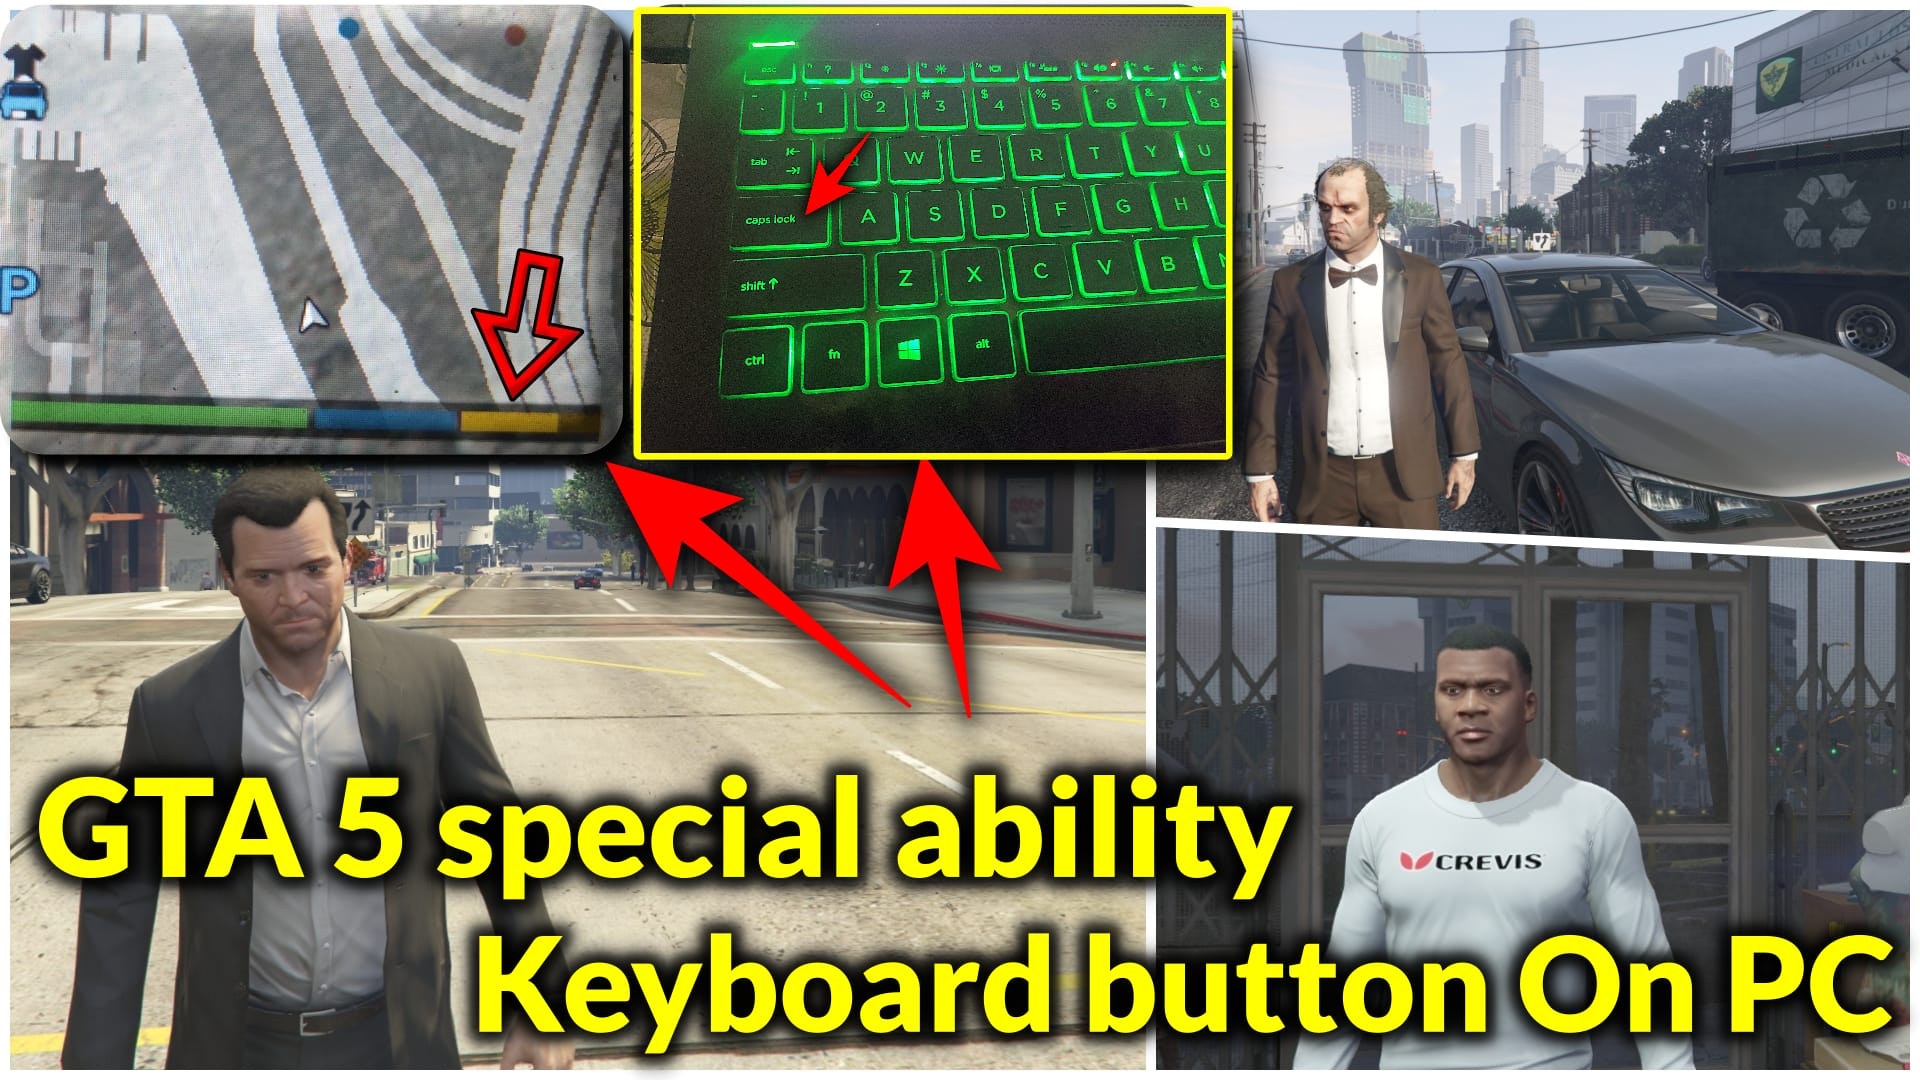 GTA 5 special ability button on PC